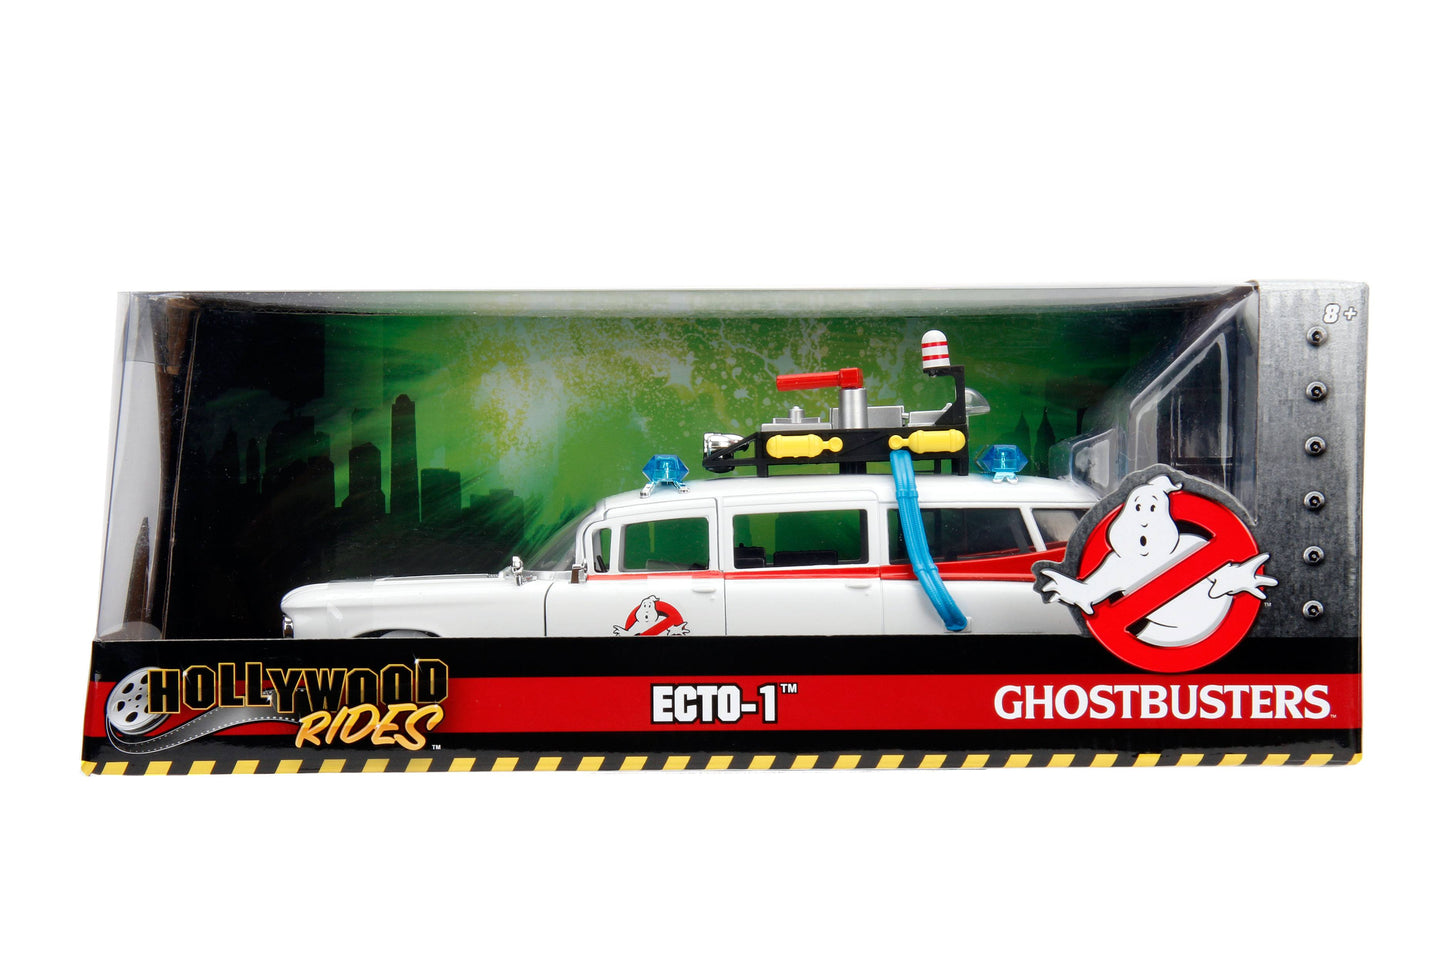 Ghostbusters diecast scale 1/24 1959 Cadillac Ecto-1